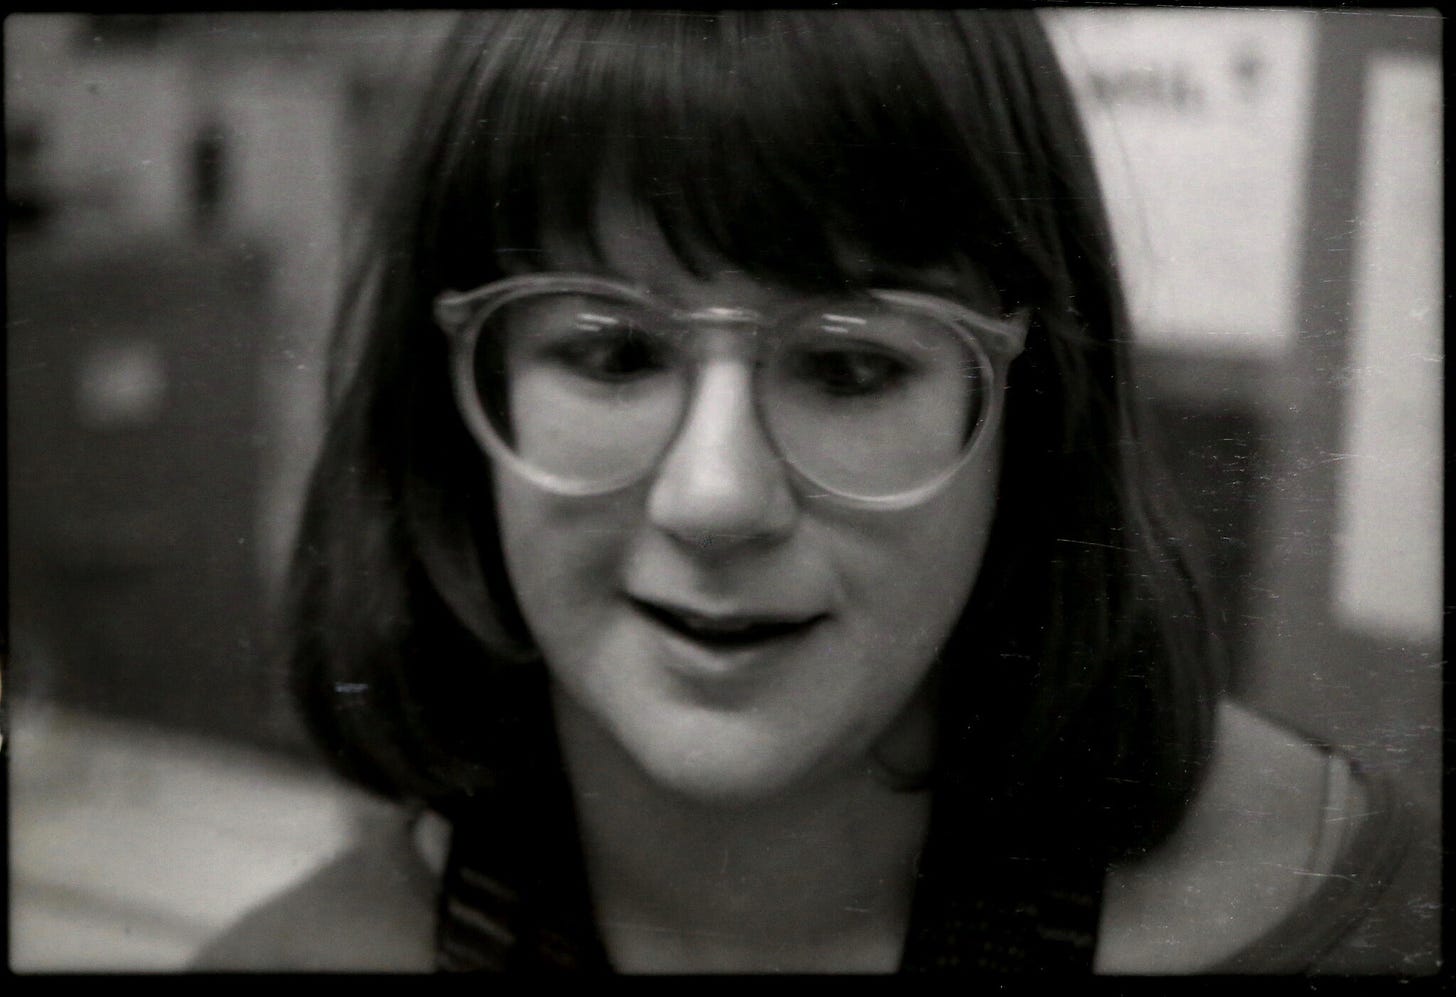 A black-and-white photo of a young, bespectacled woman with dark hair. Her lips are slightly parted as if she's in conversation.